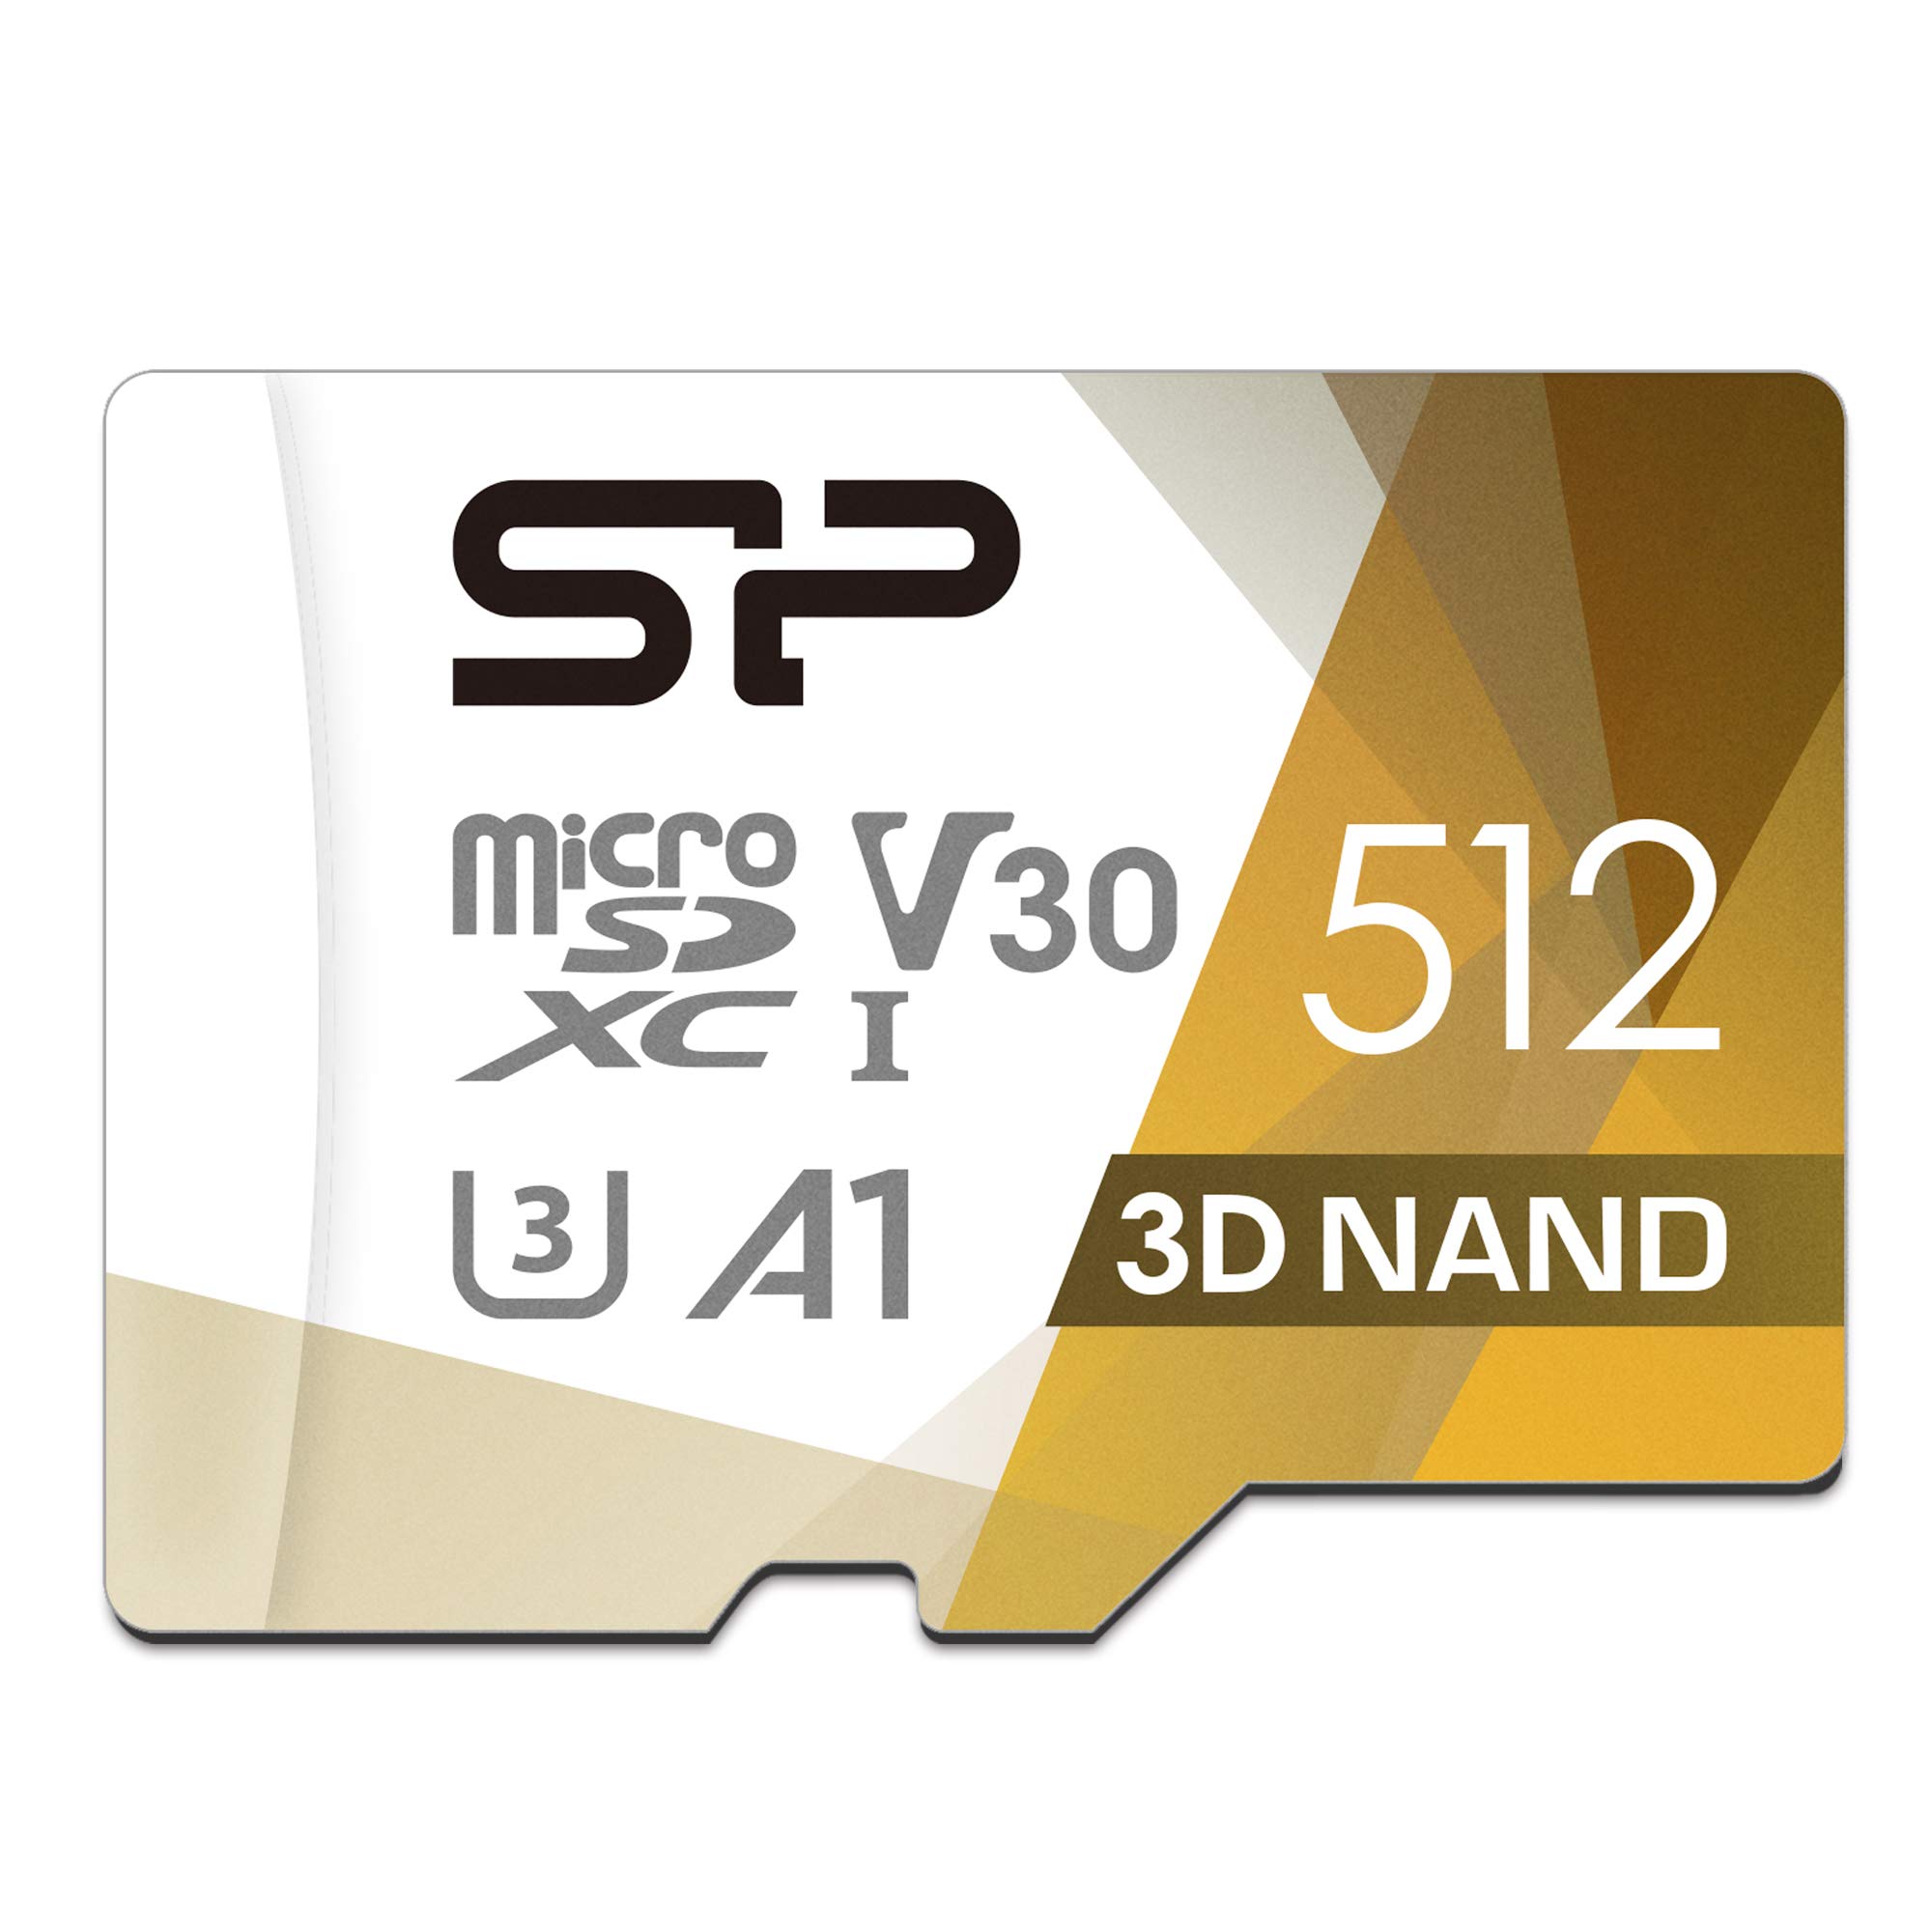 SP Silicon Power Silicon Power 512gB Micro SD card U3 SDXc microsdxc High Speed MicroSD Memory card with Adapter for Nintendo-Switch Steam Deck D